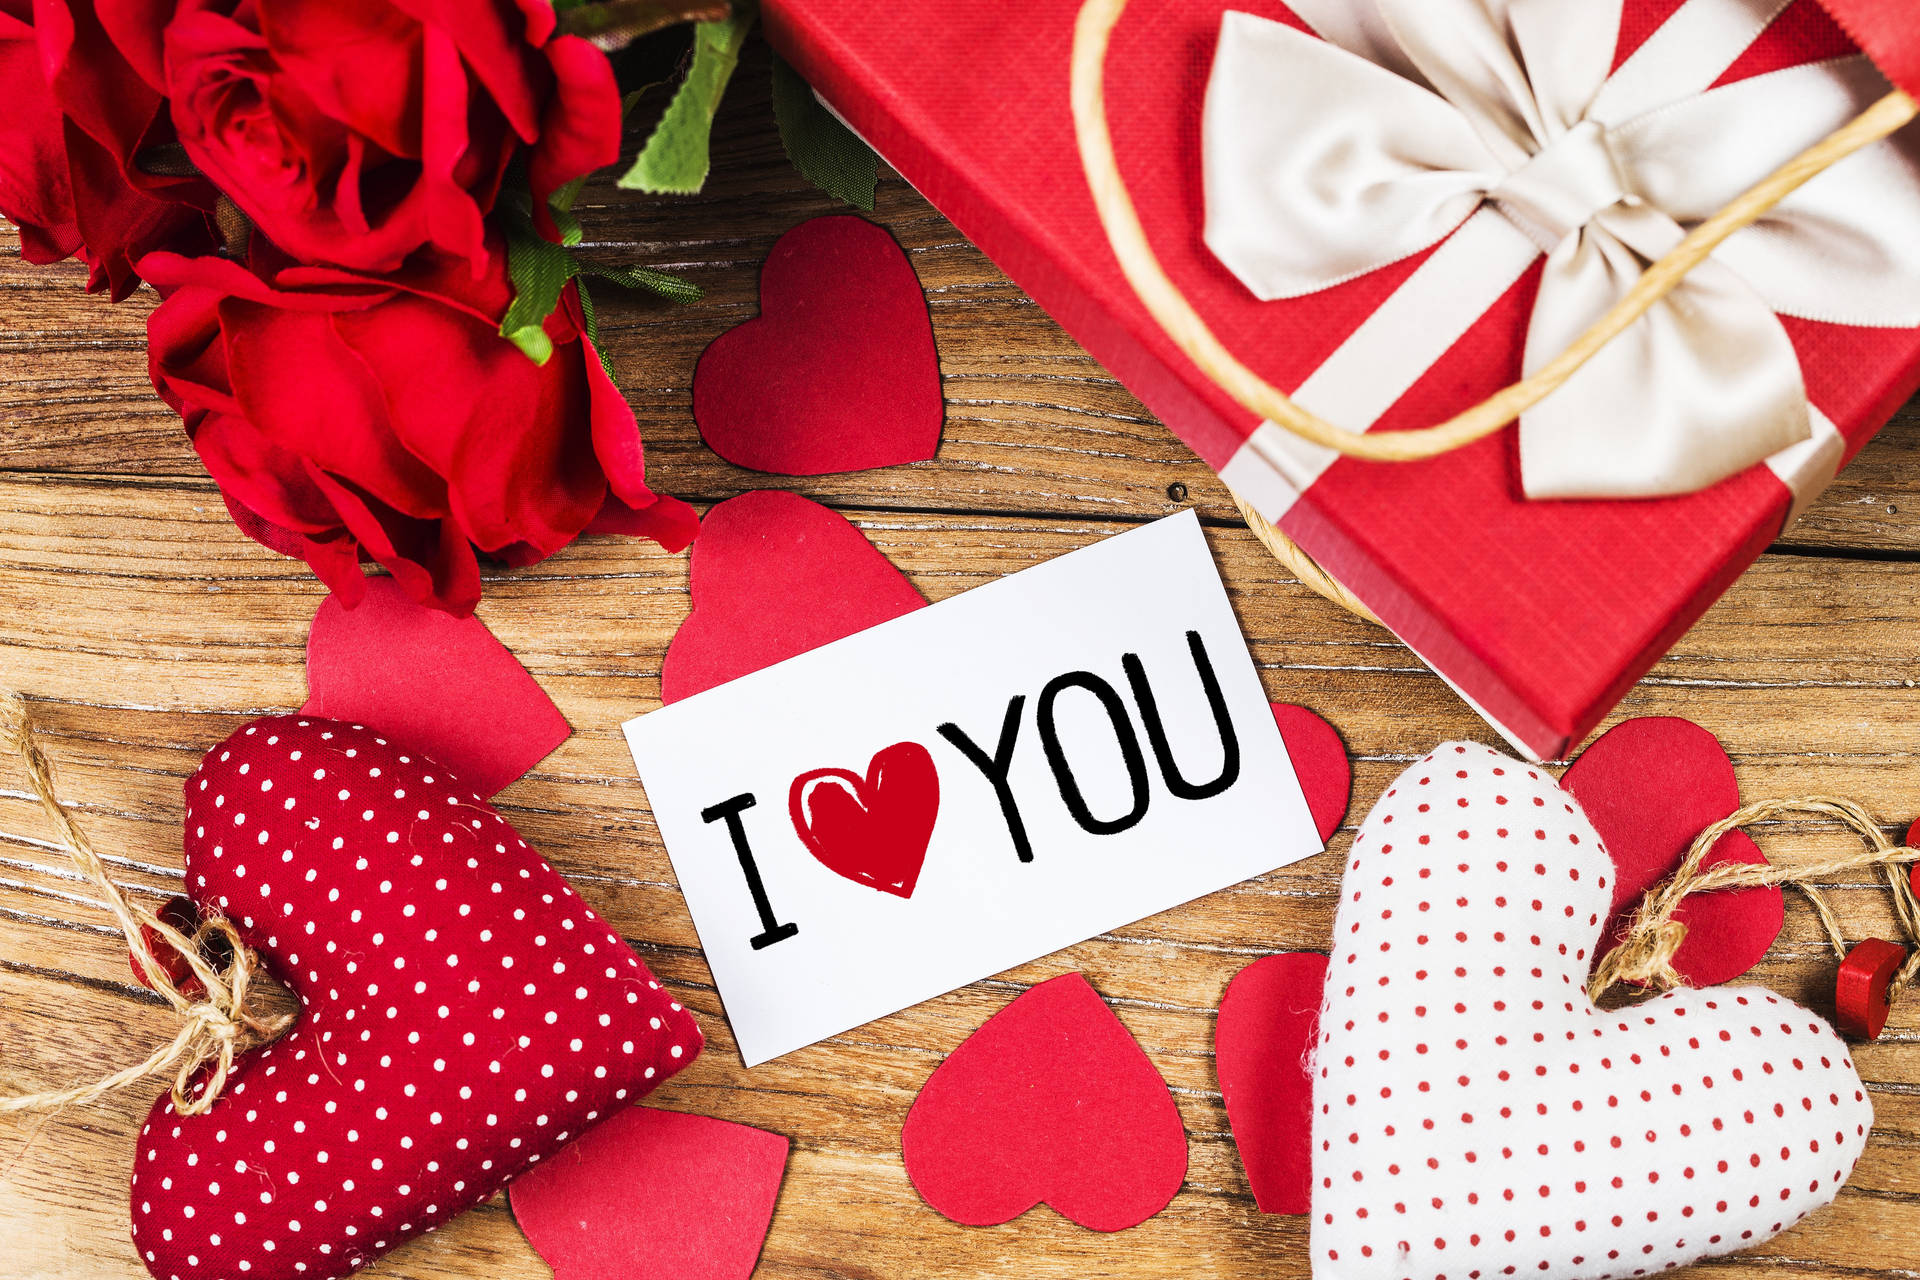 Romantic Love Flowers And Gifts Background